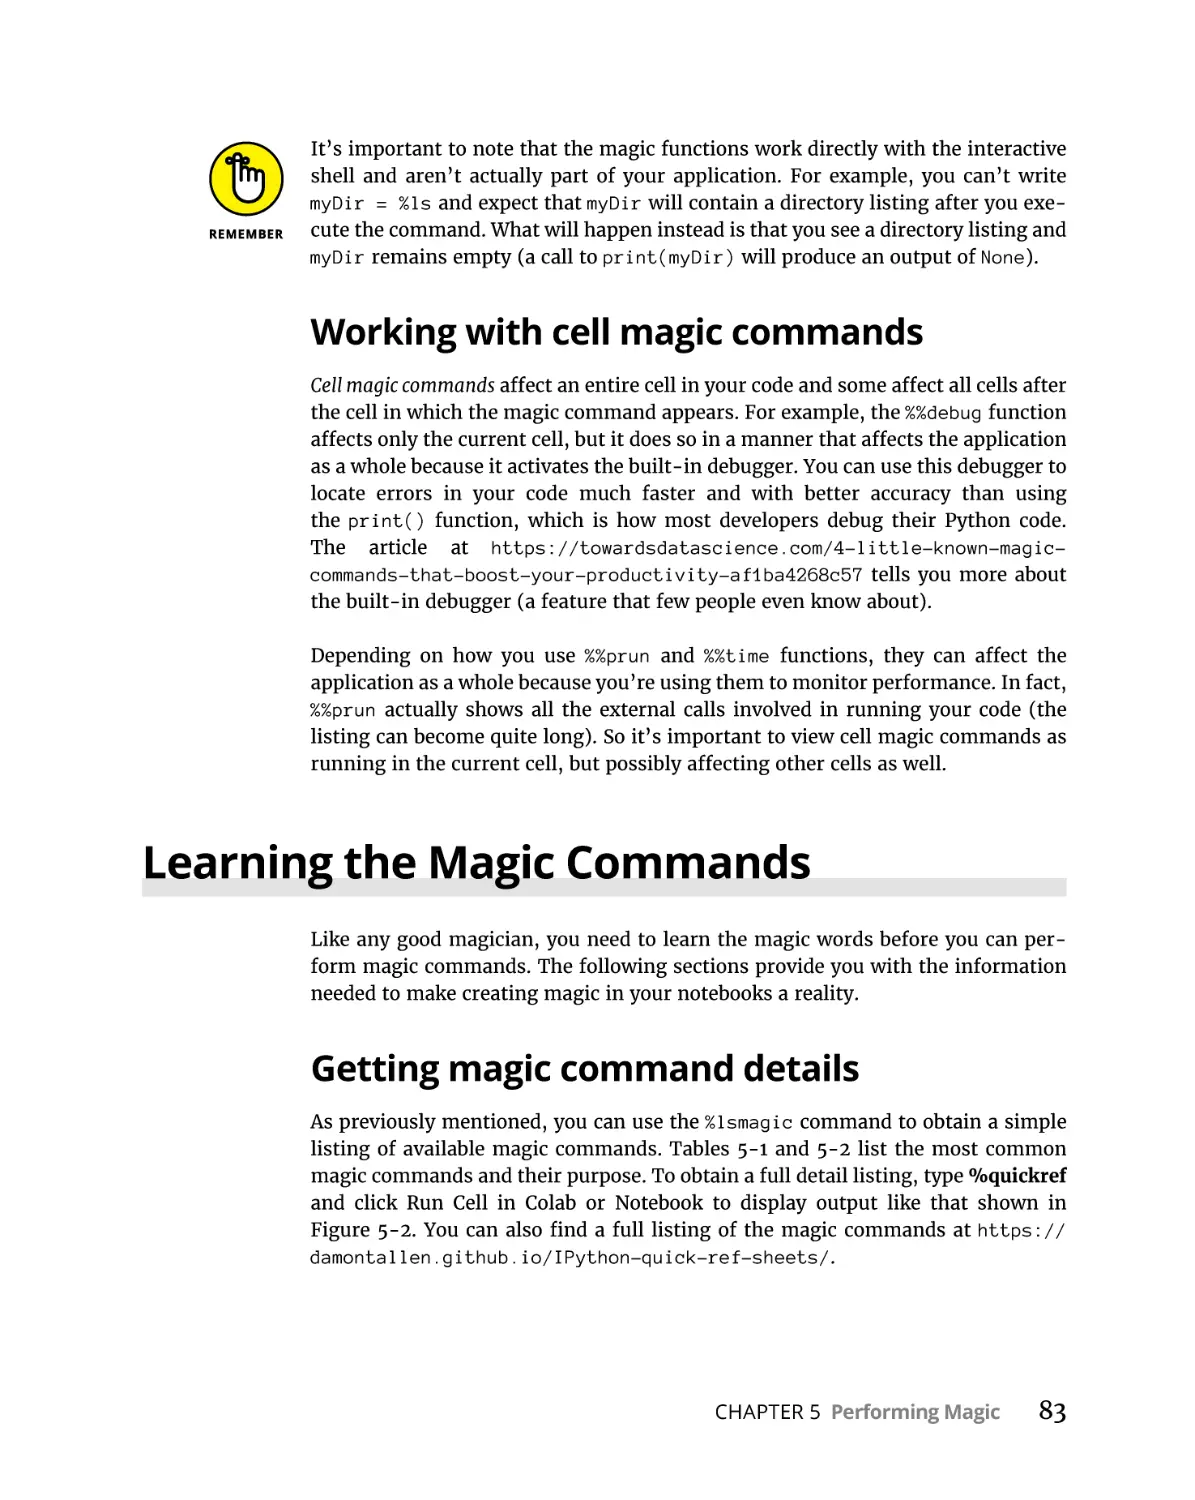 Working with cell magic commands
Learning the Magic Commands
Getting magic command details